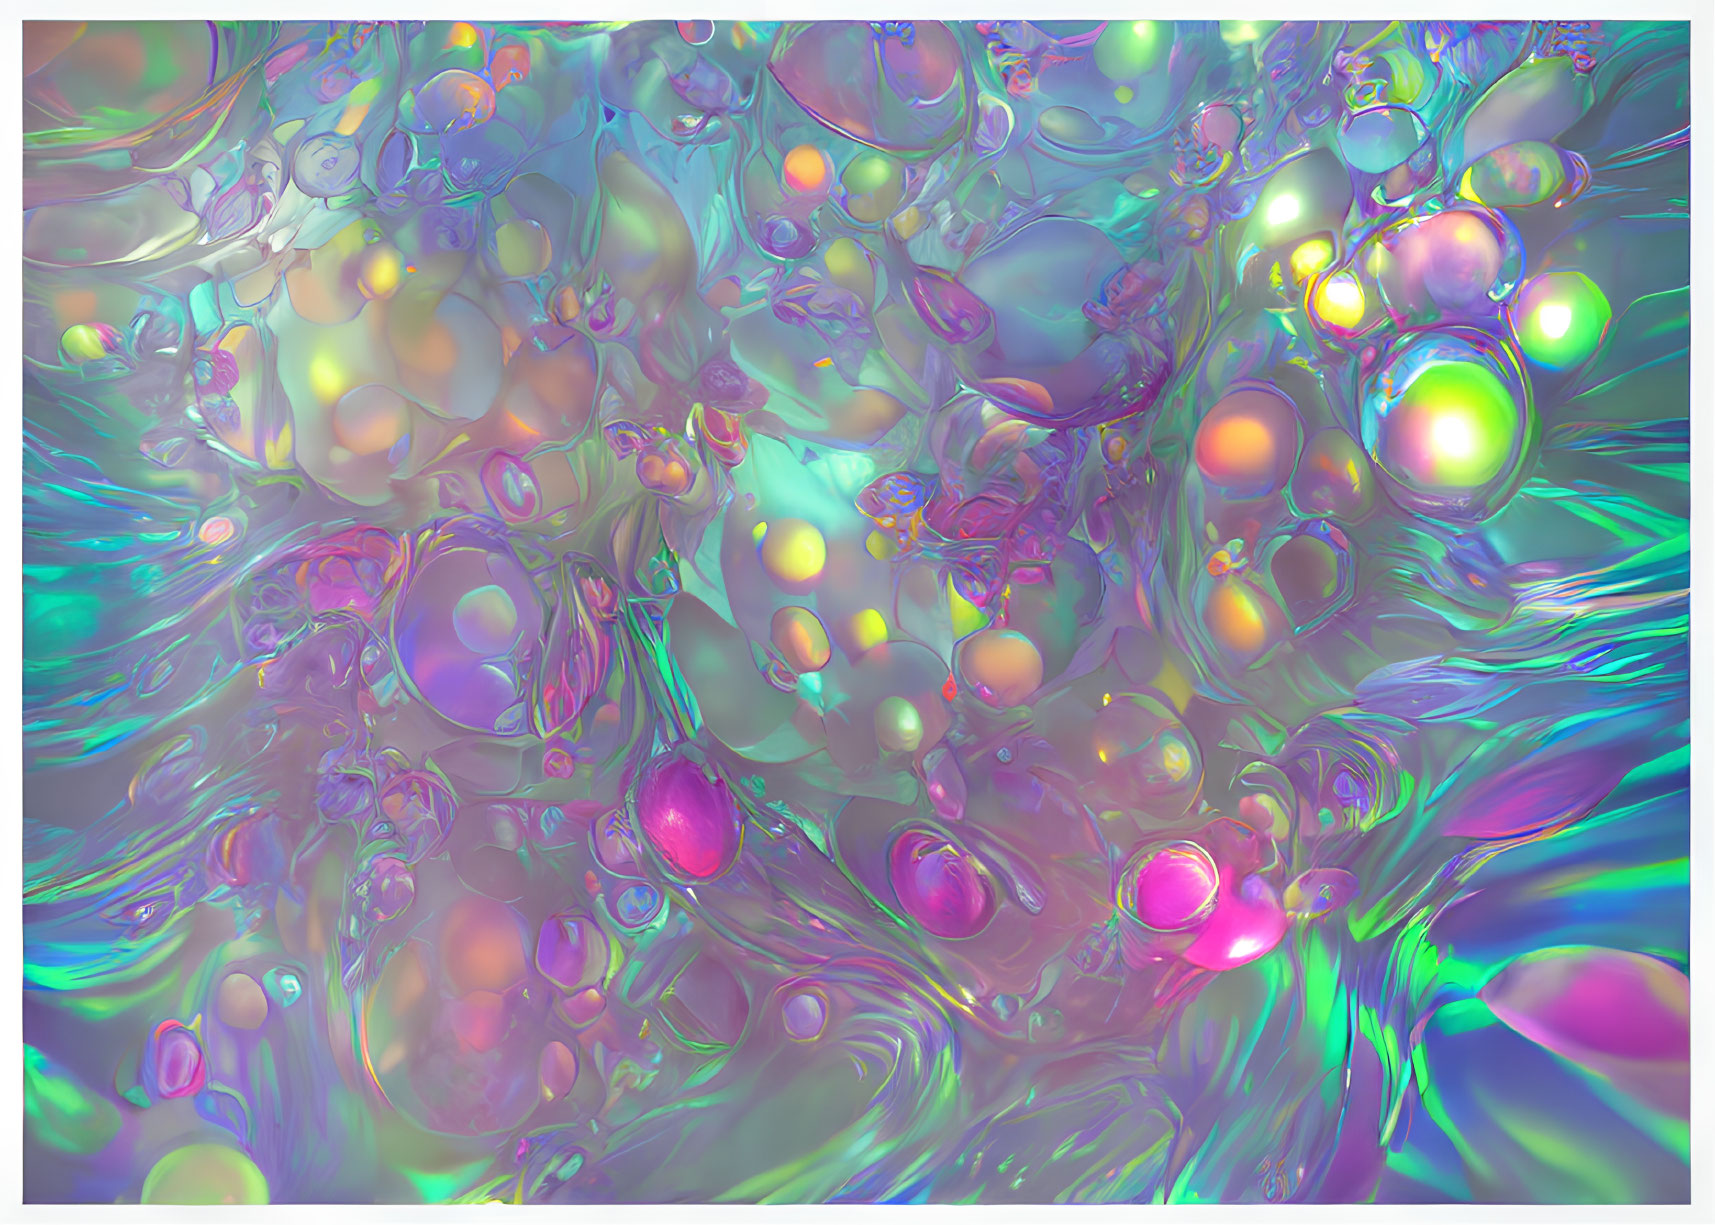 Vibrant abstract art with iridescent bubbles and liquid forms in blues, greens, and p